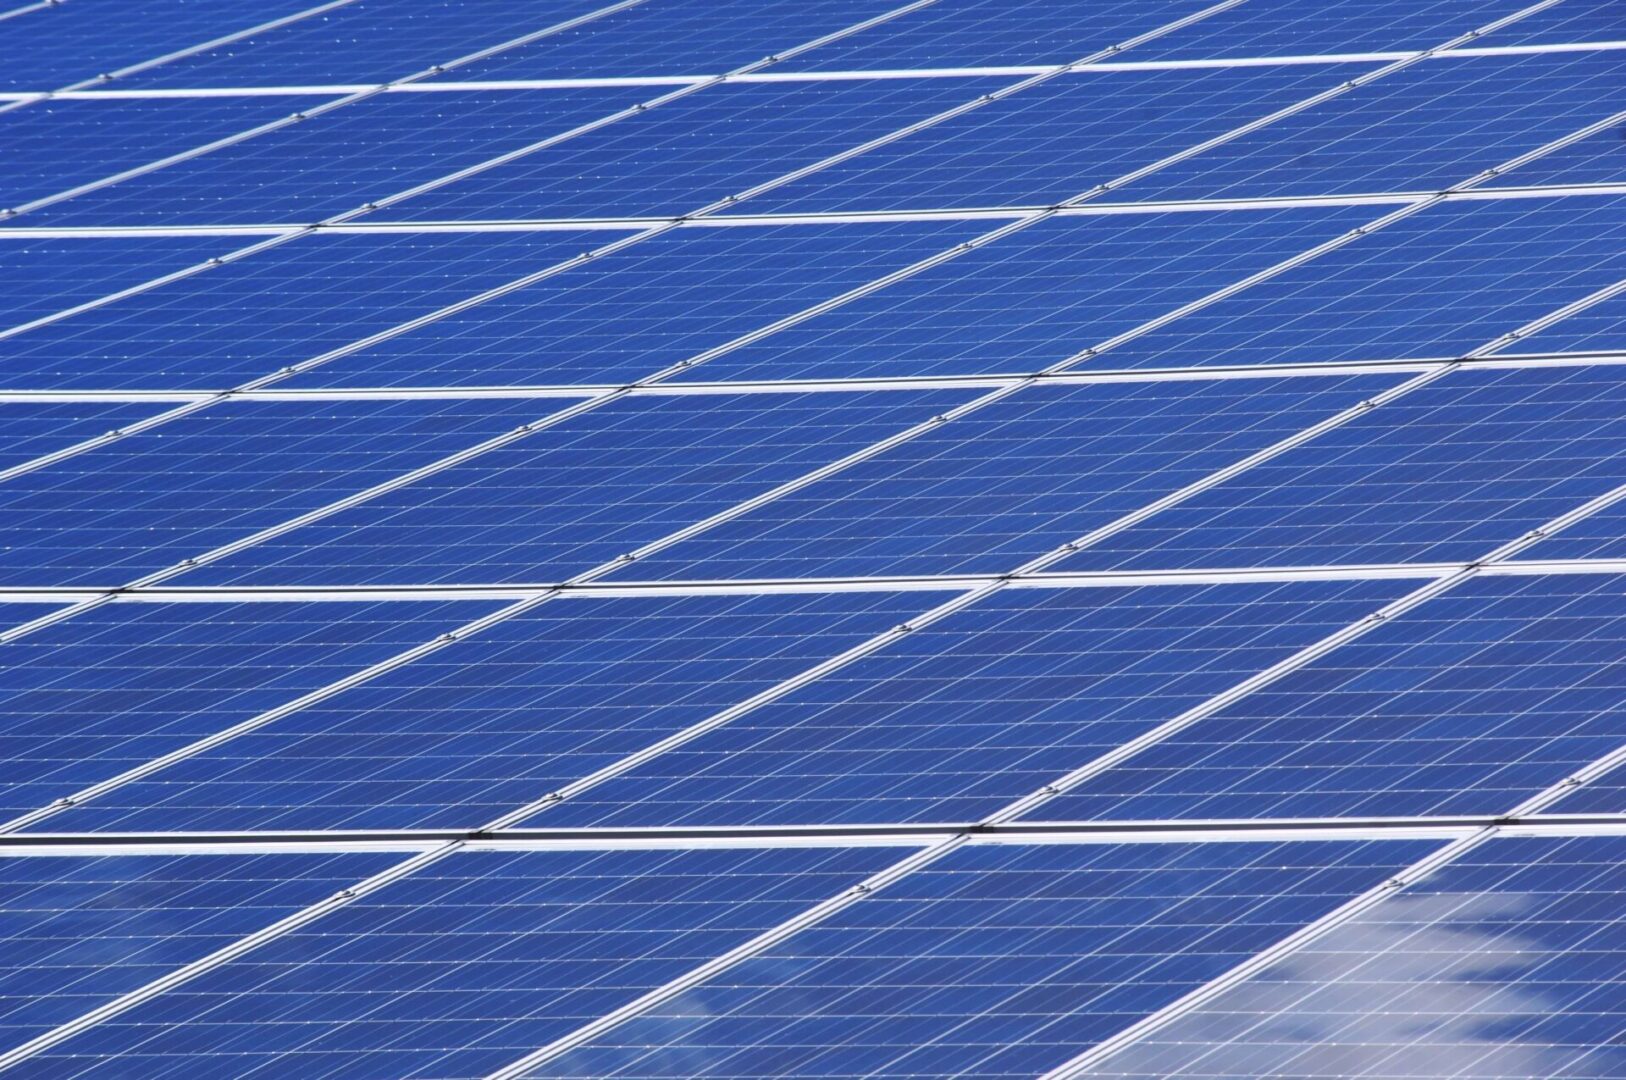 A close up of some solar panels on the ground